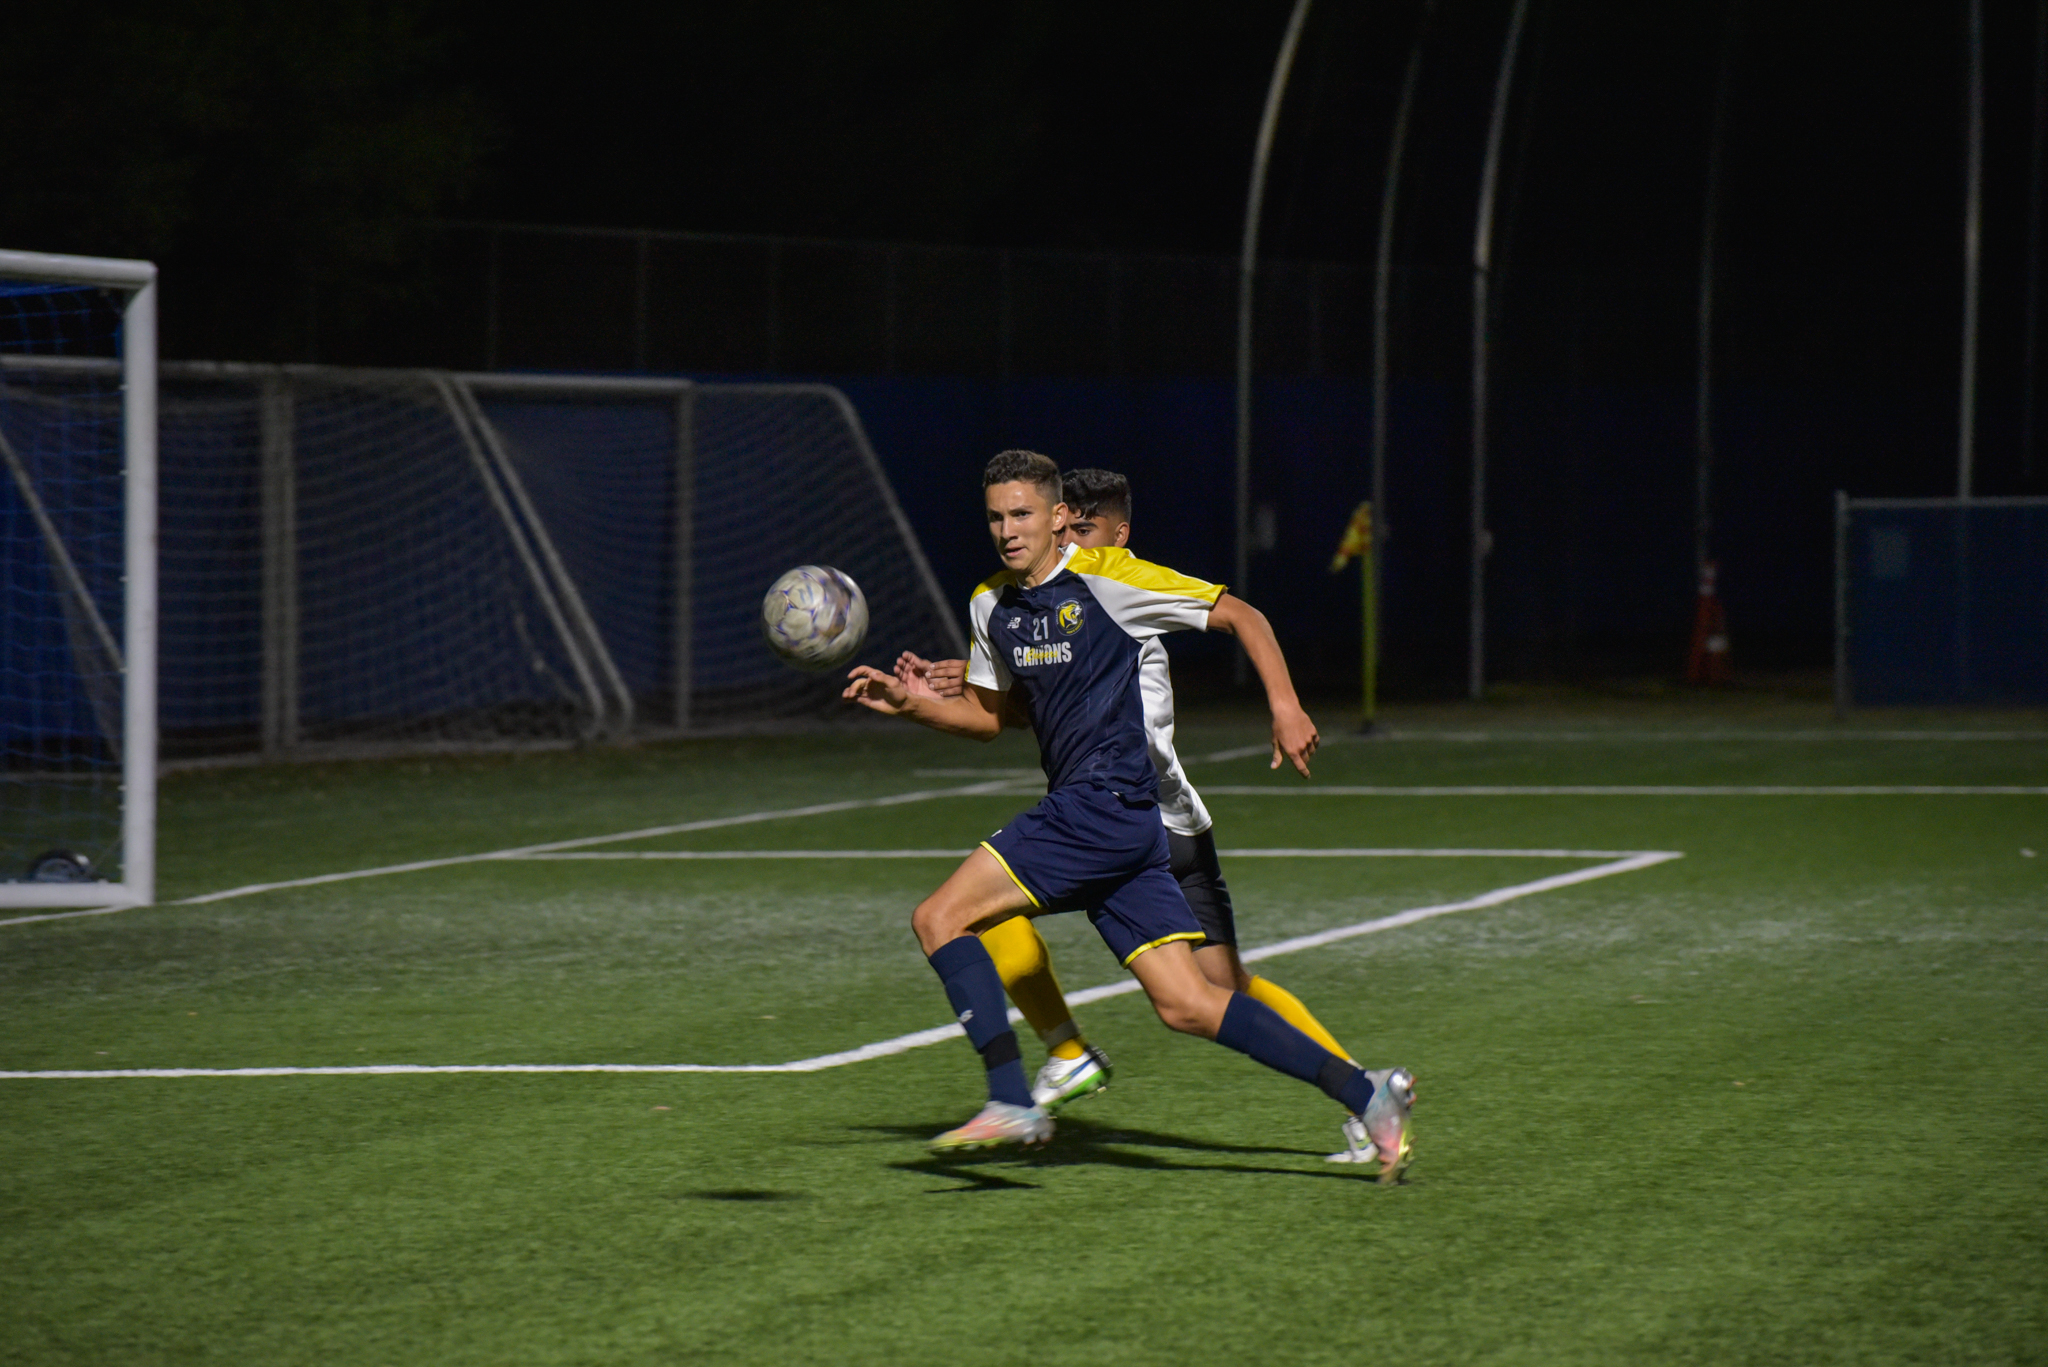 College of the Canyons freshman Josh Swanson (21) was able to put the ball past Glendale’s goalkeeper in the 80th minute to help the Cougars earn a 1-1 draw. — Mari Kneisel/COC Sports Information